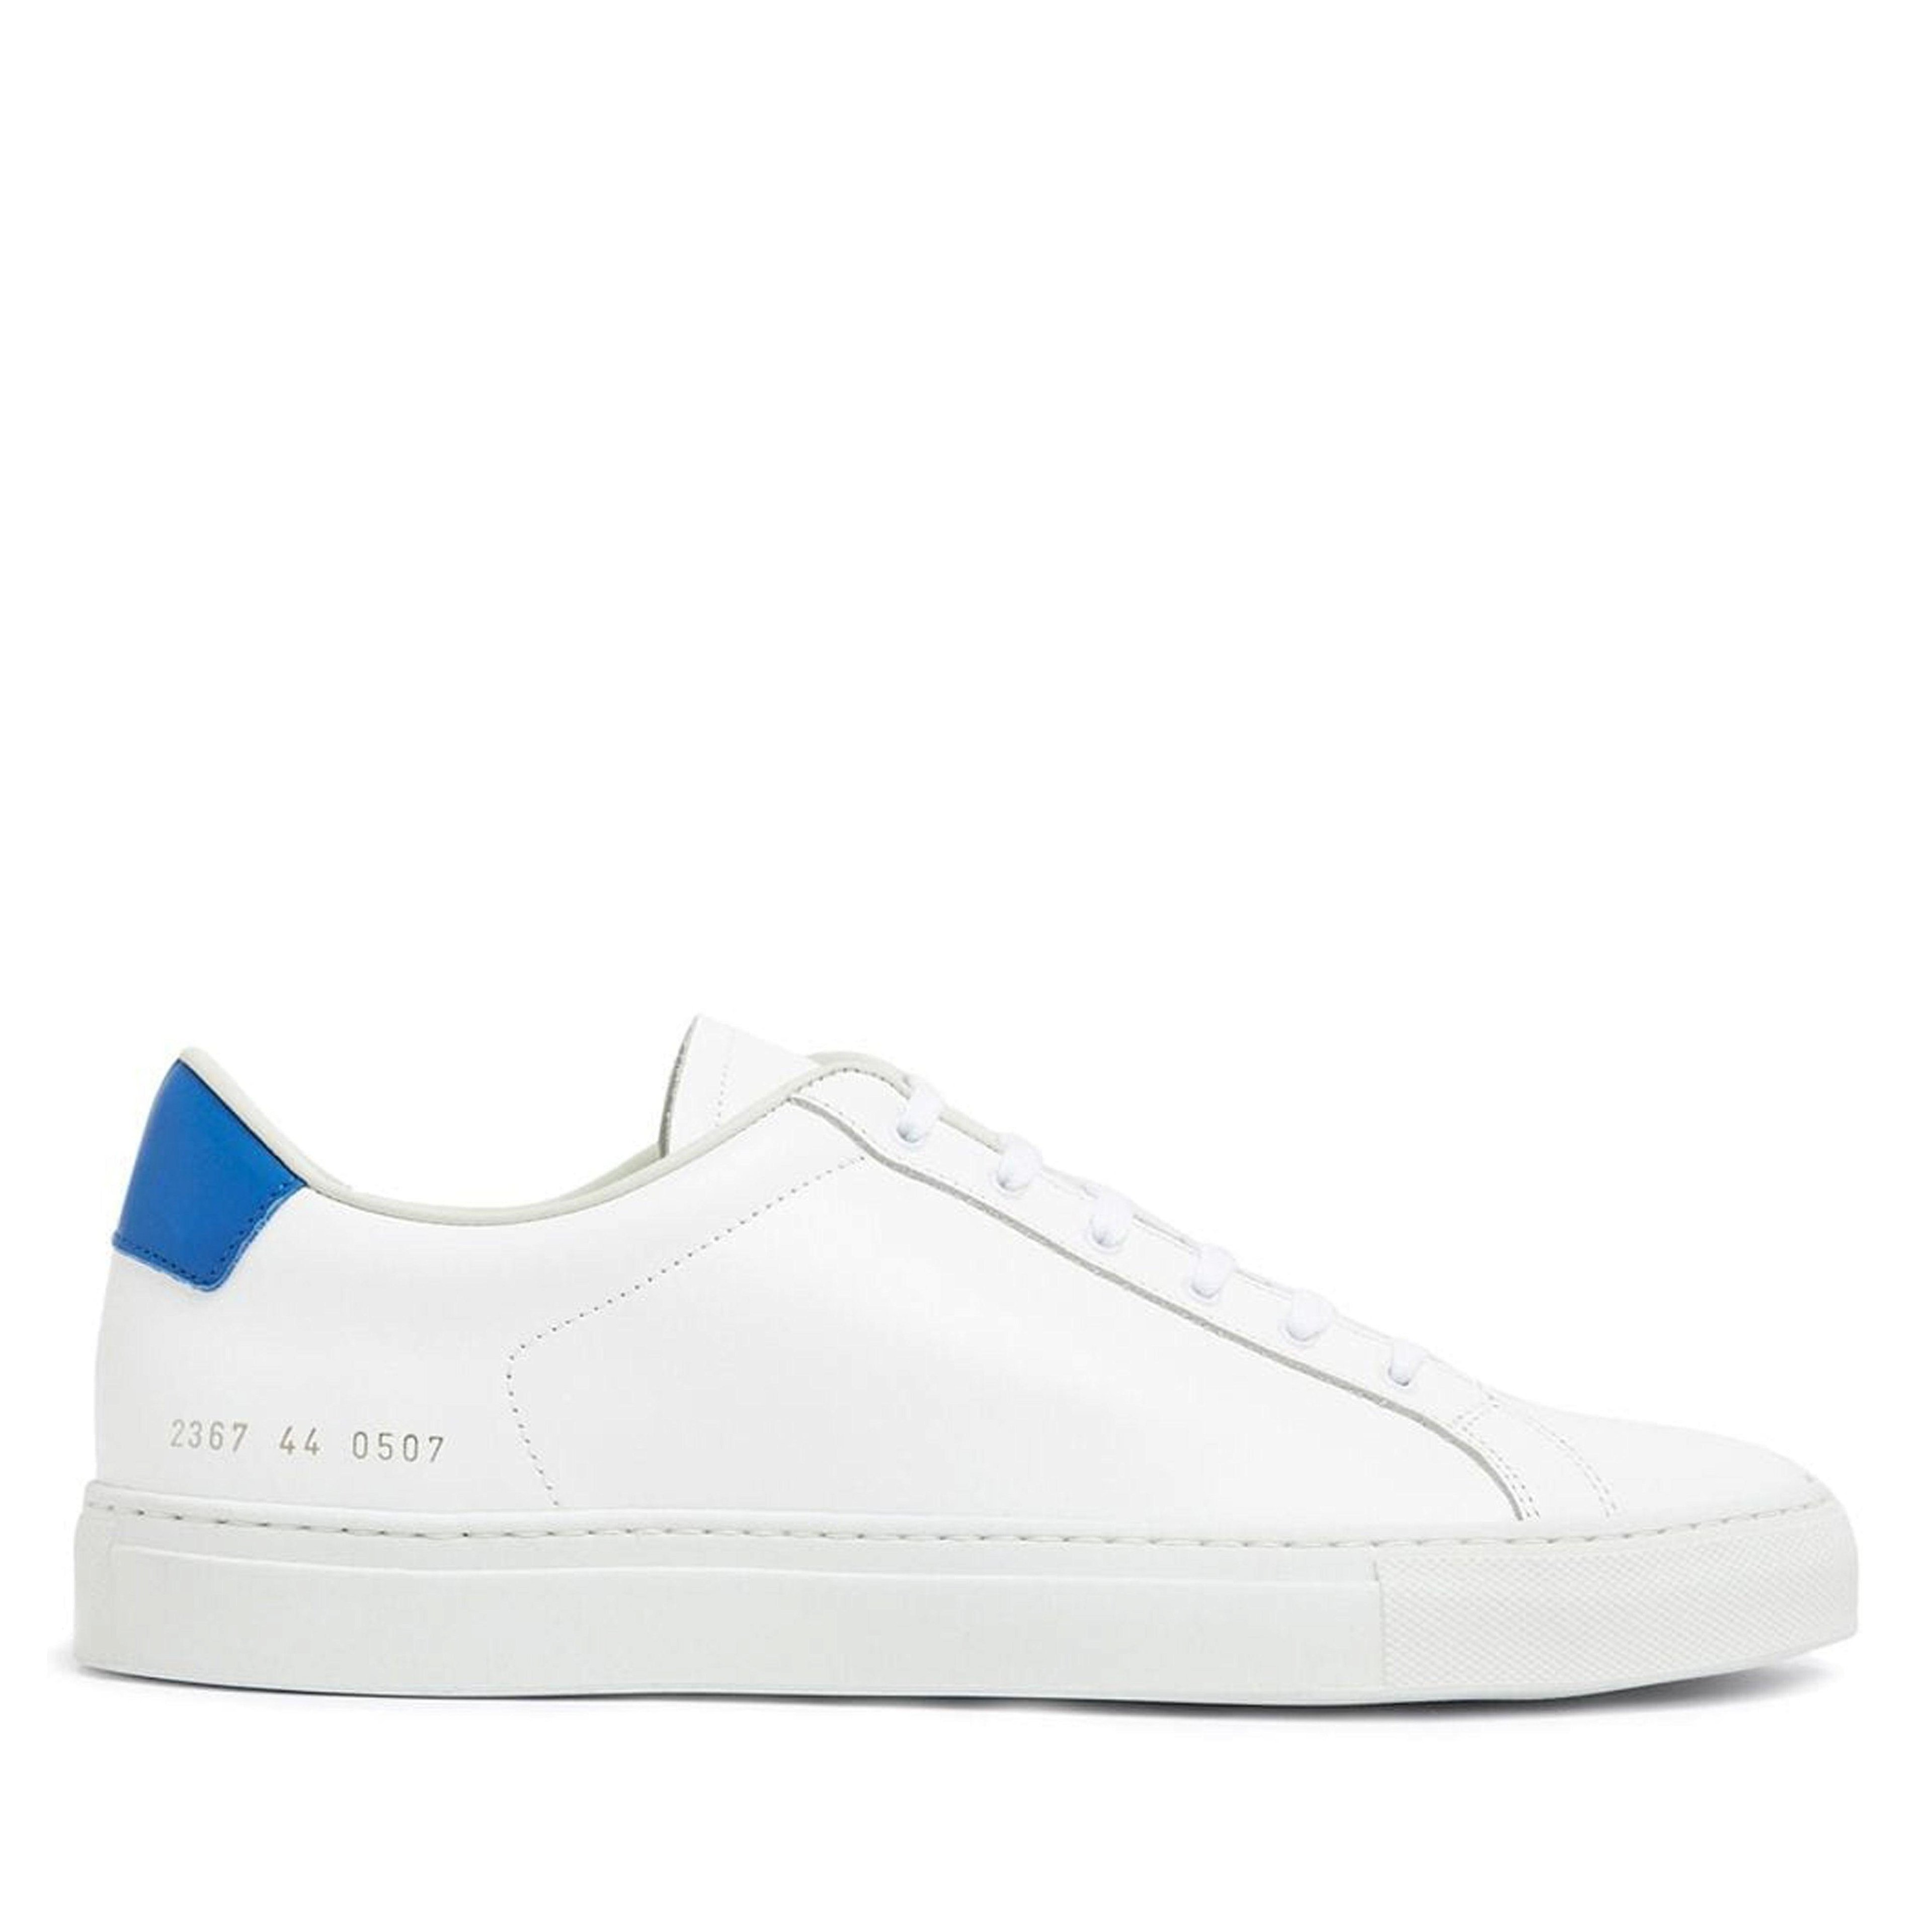 Common Projects - Retro Classic Sneakers - (White/Blue) by COMMON PROJECTS